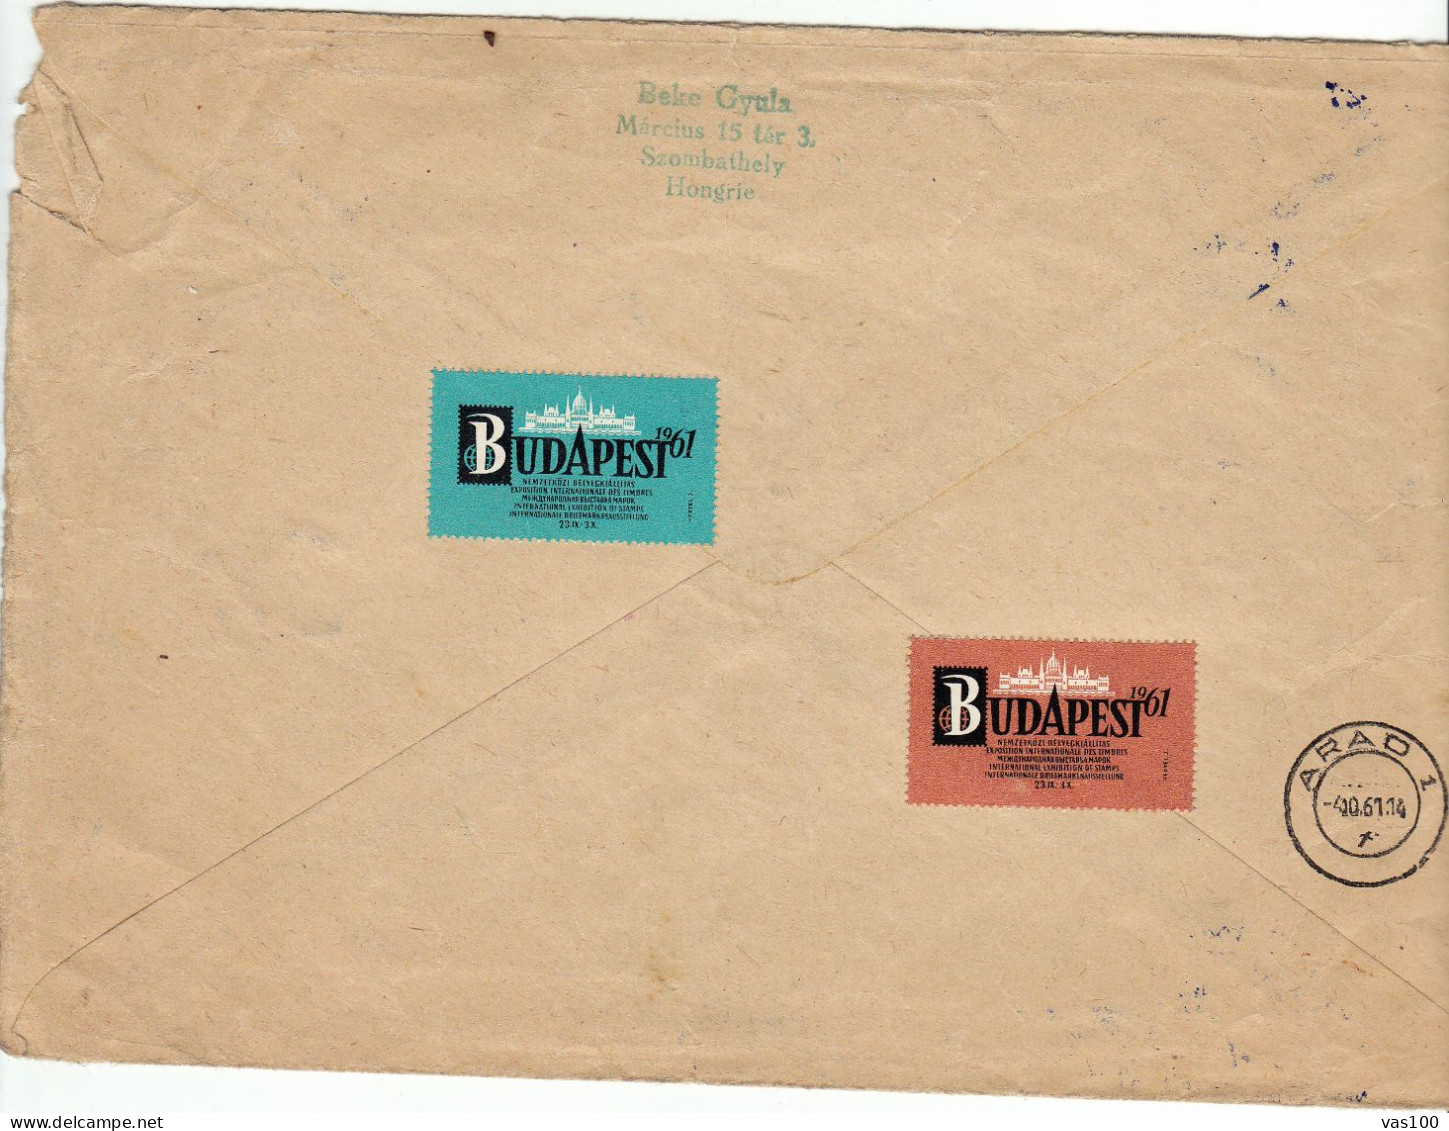 HISTORICAL DOCUMENTS  REGISTERED   COVERS NICE FRANKING  1960  HUNGARY - Storia Postale